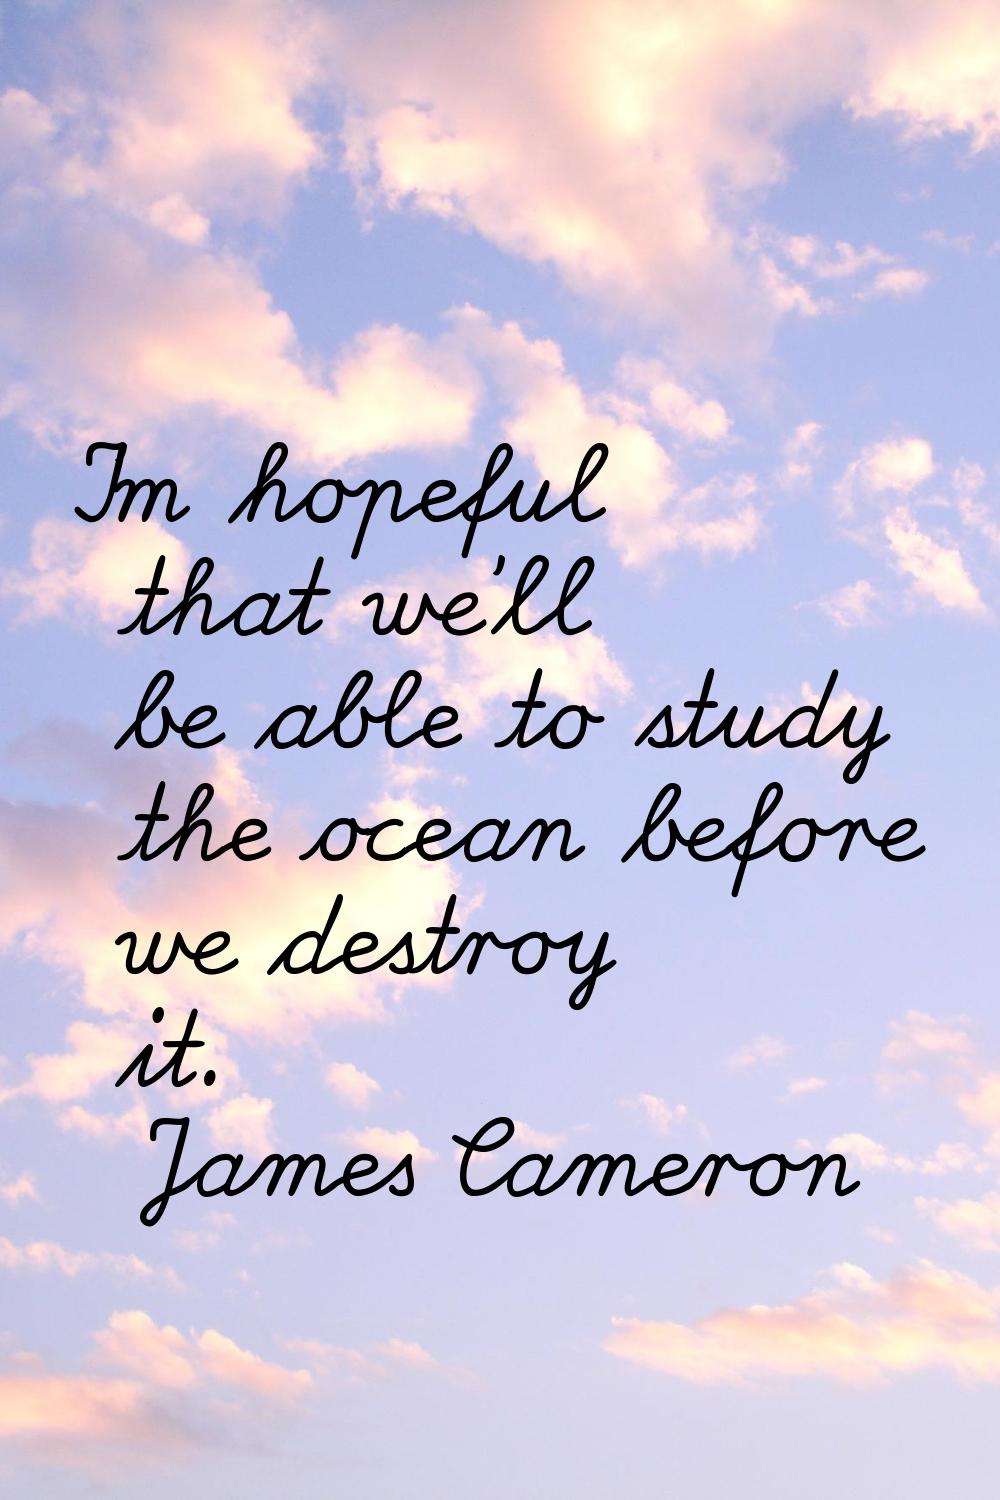 I'm hopeful that we'll be able to study the ocean before we destroy it.